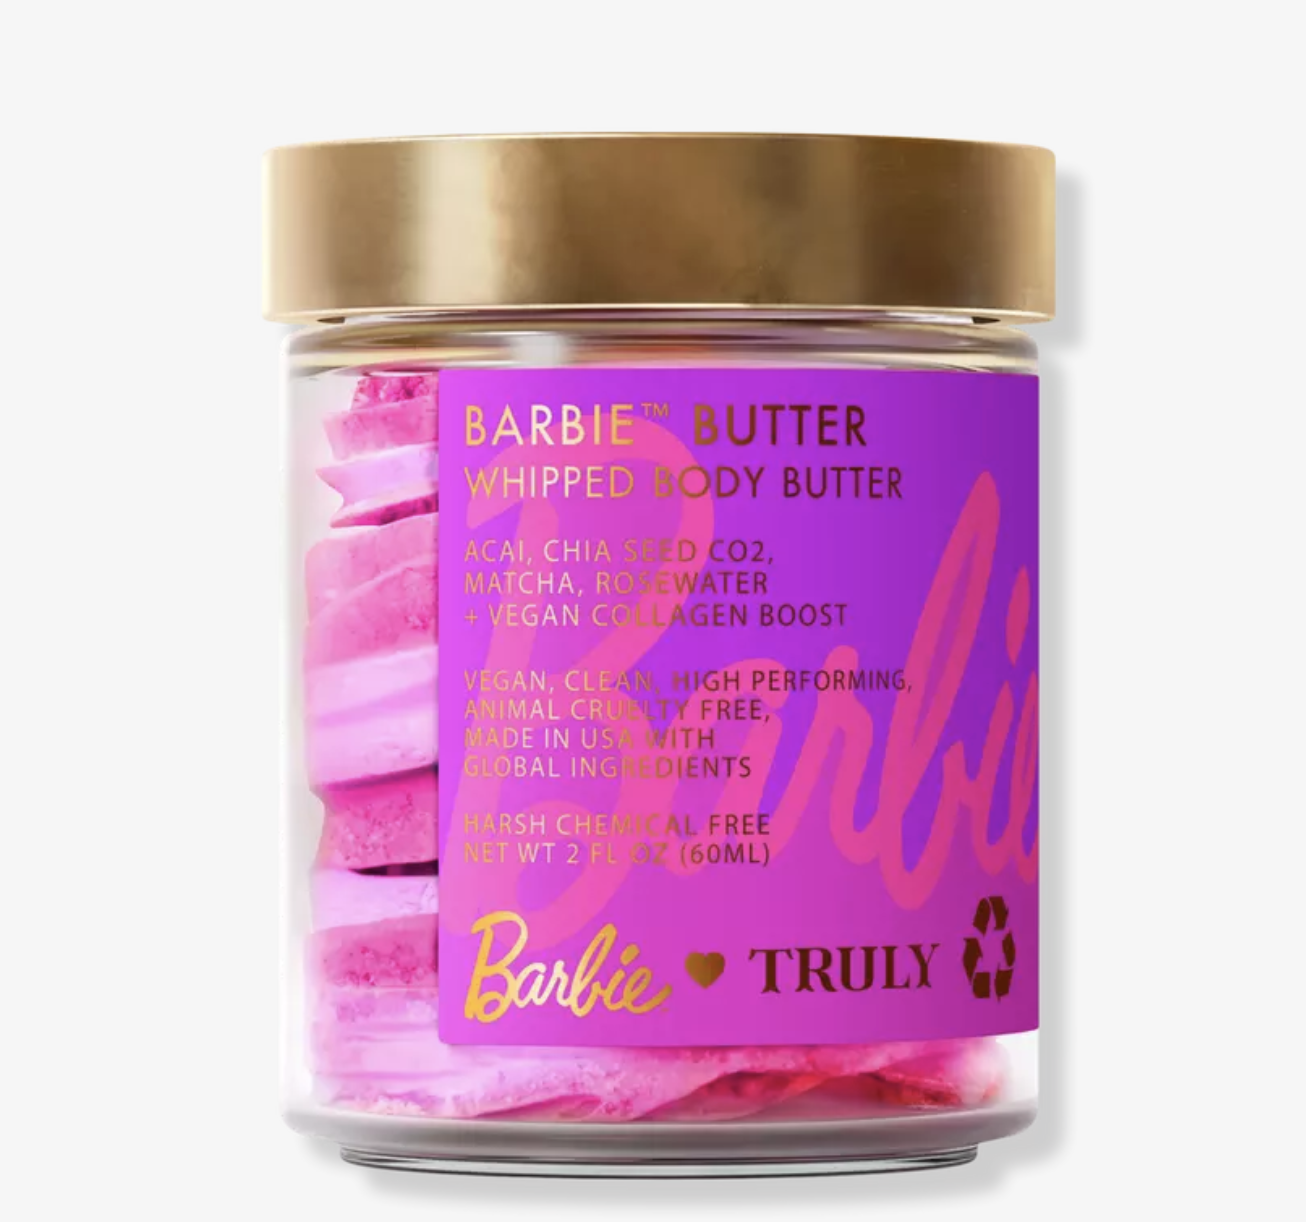 Barbie truly body butter